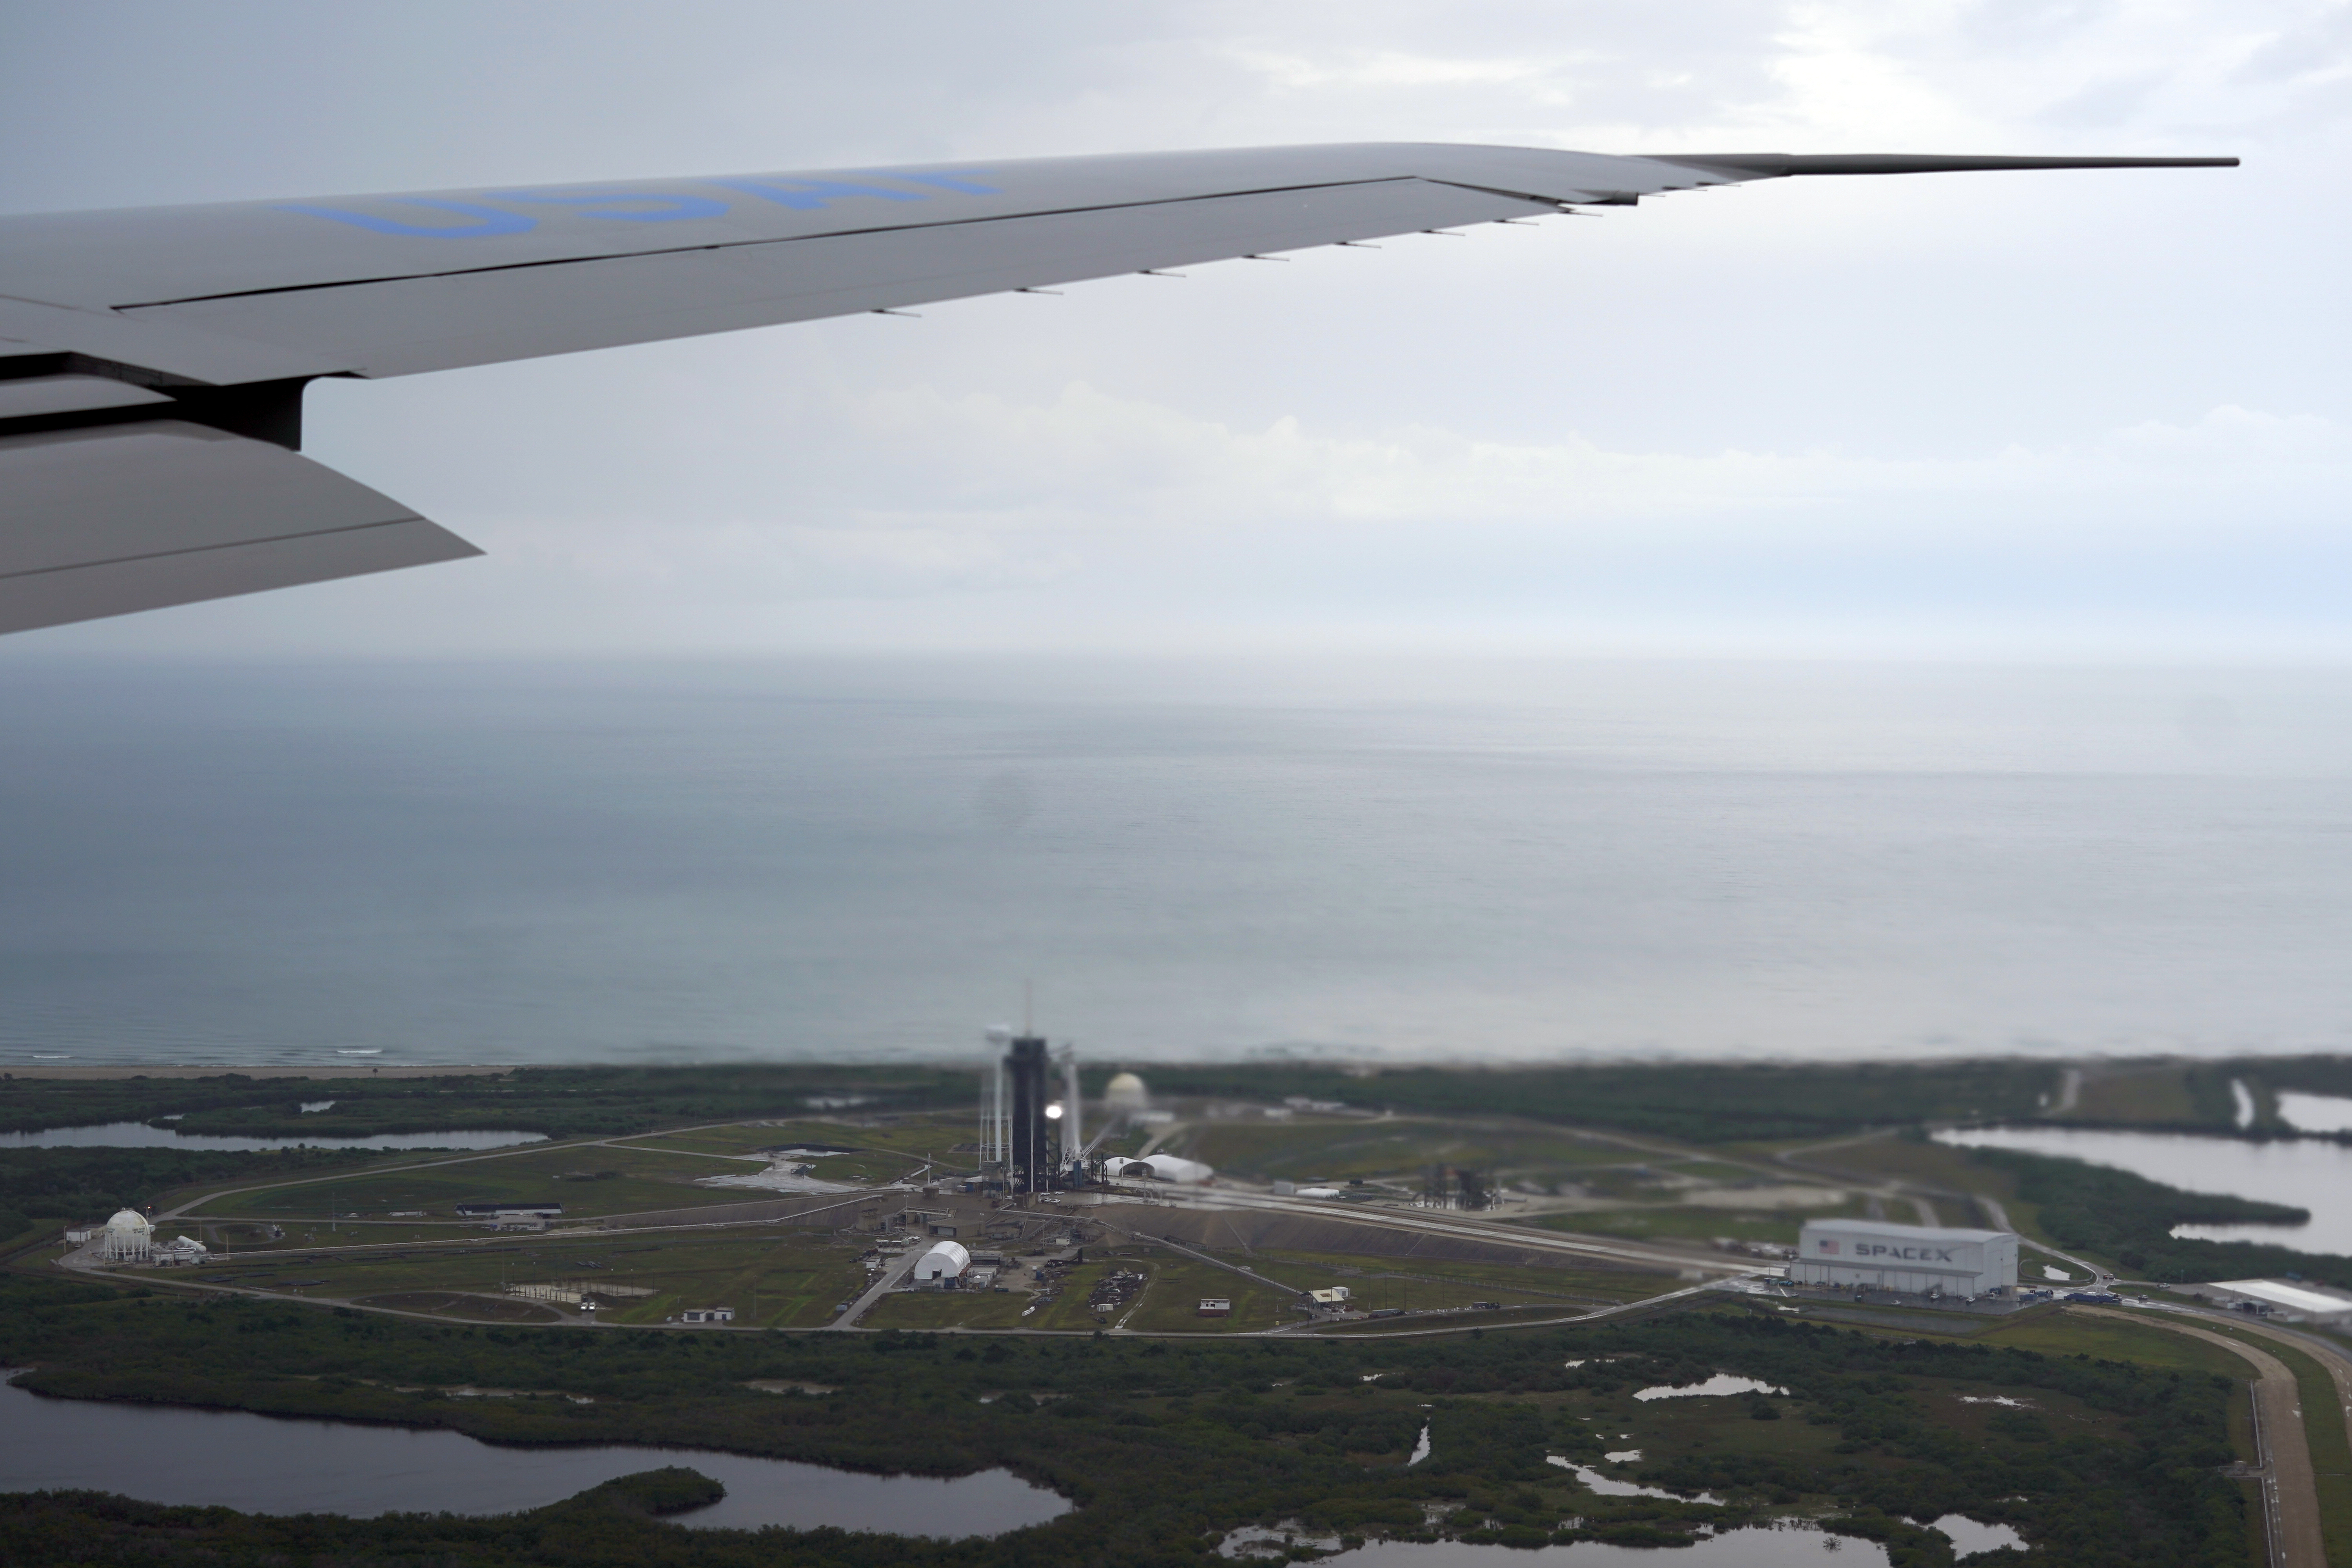 The SpaceX launch pad is seen from the window of Air Force One at Kennedy Space Center. (AP Photo/Evan Vucci)